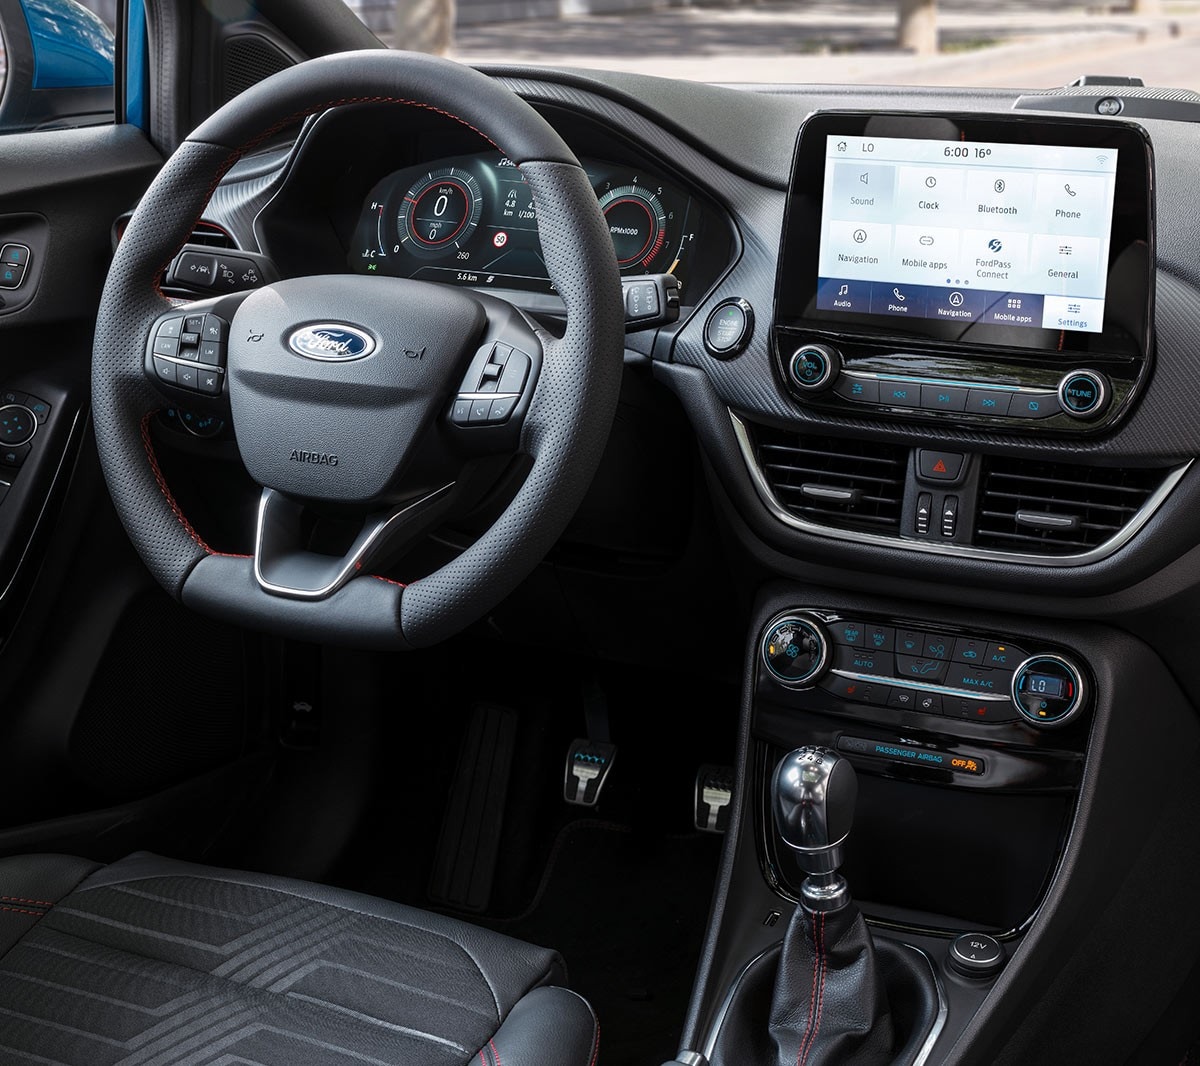 Ford Puma interior showing leather steering wheel